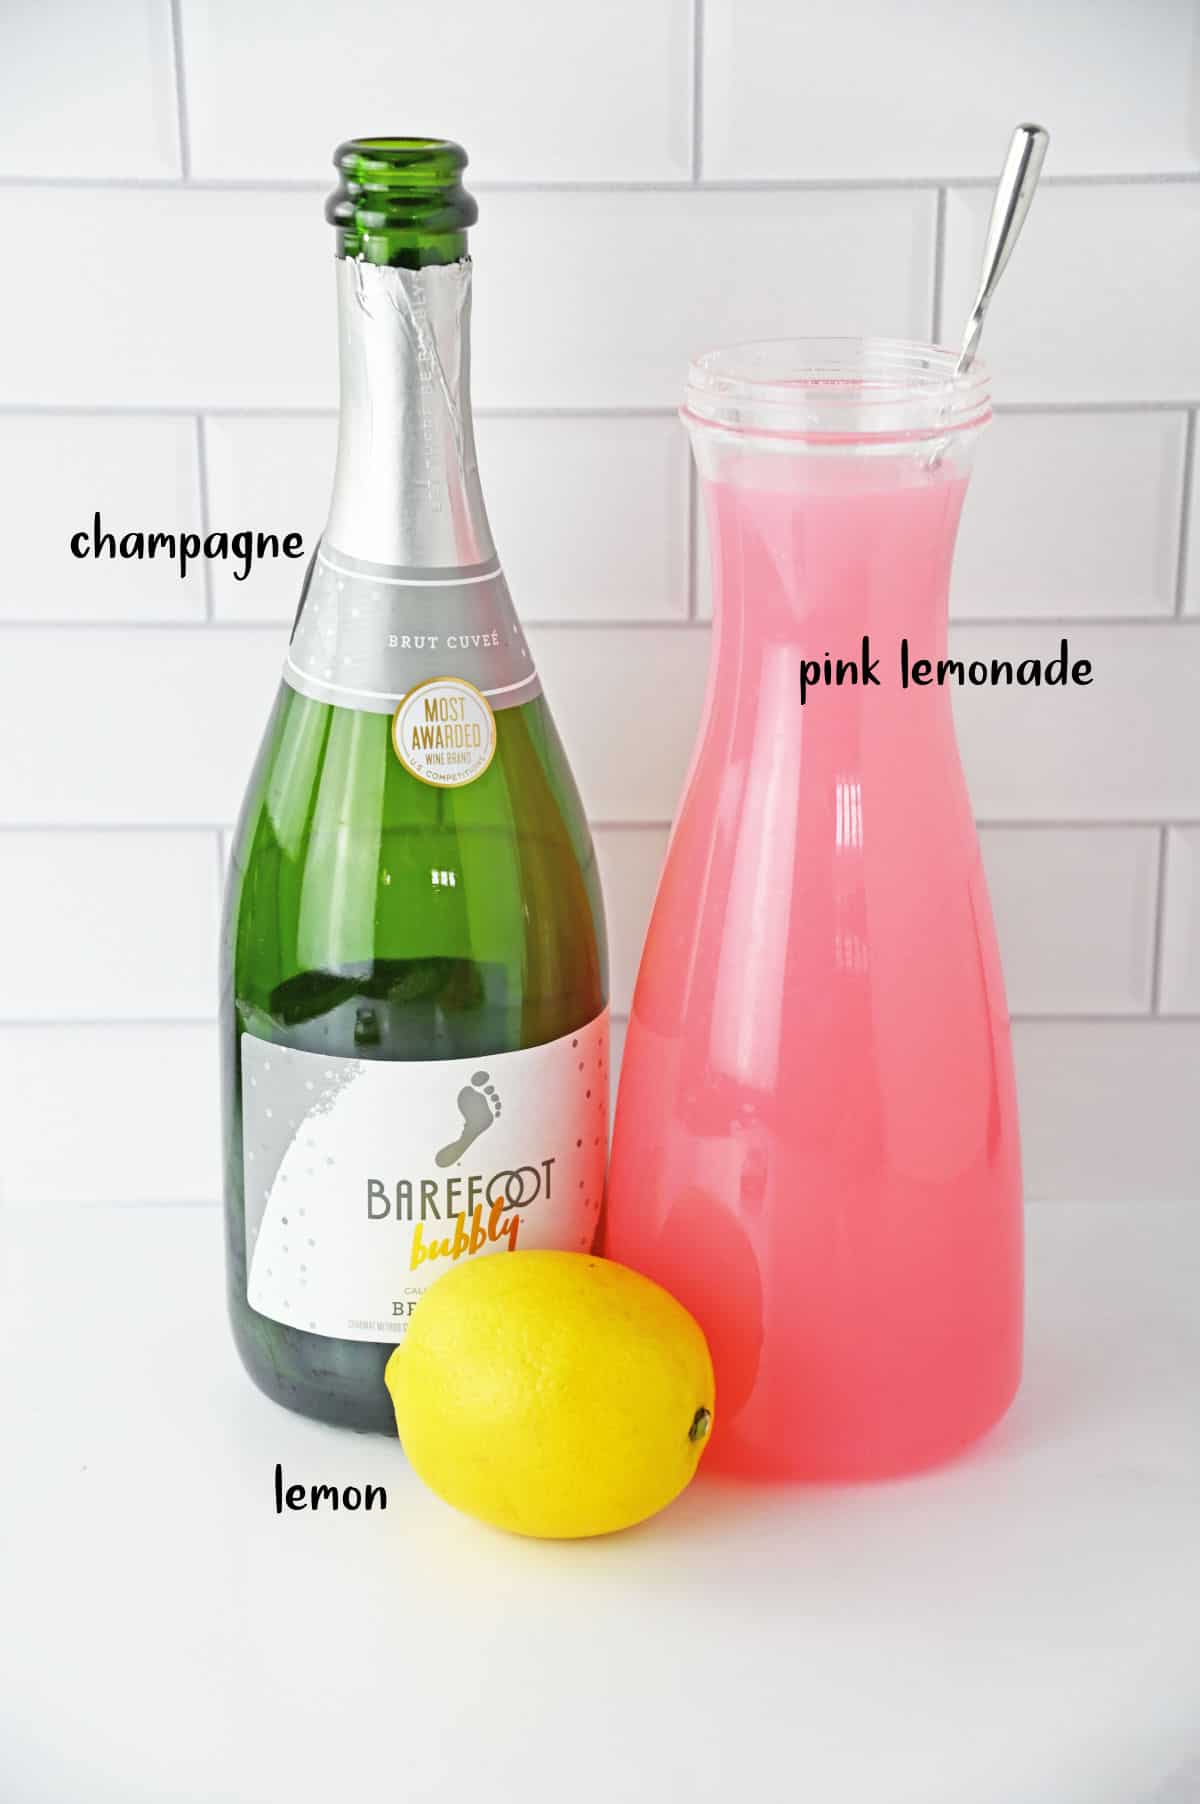 A bottle of champagne, a jug of pink lemonade, and lemons on a white counter.